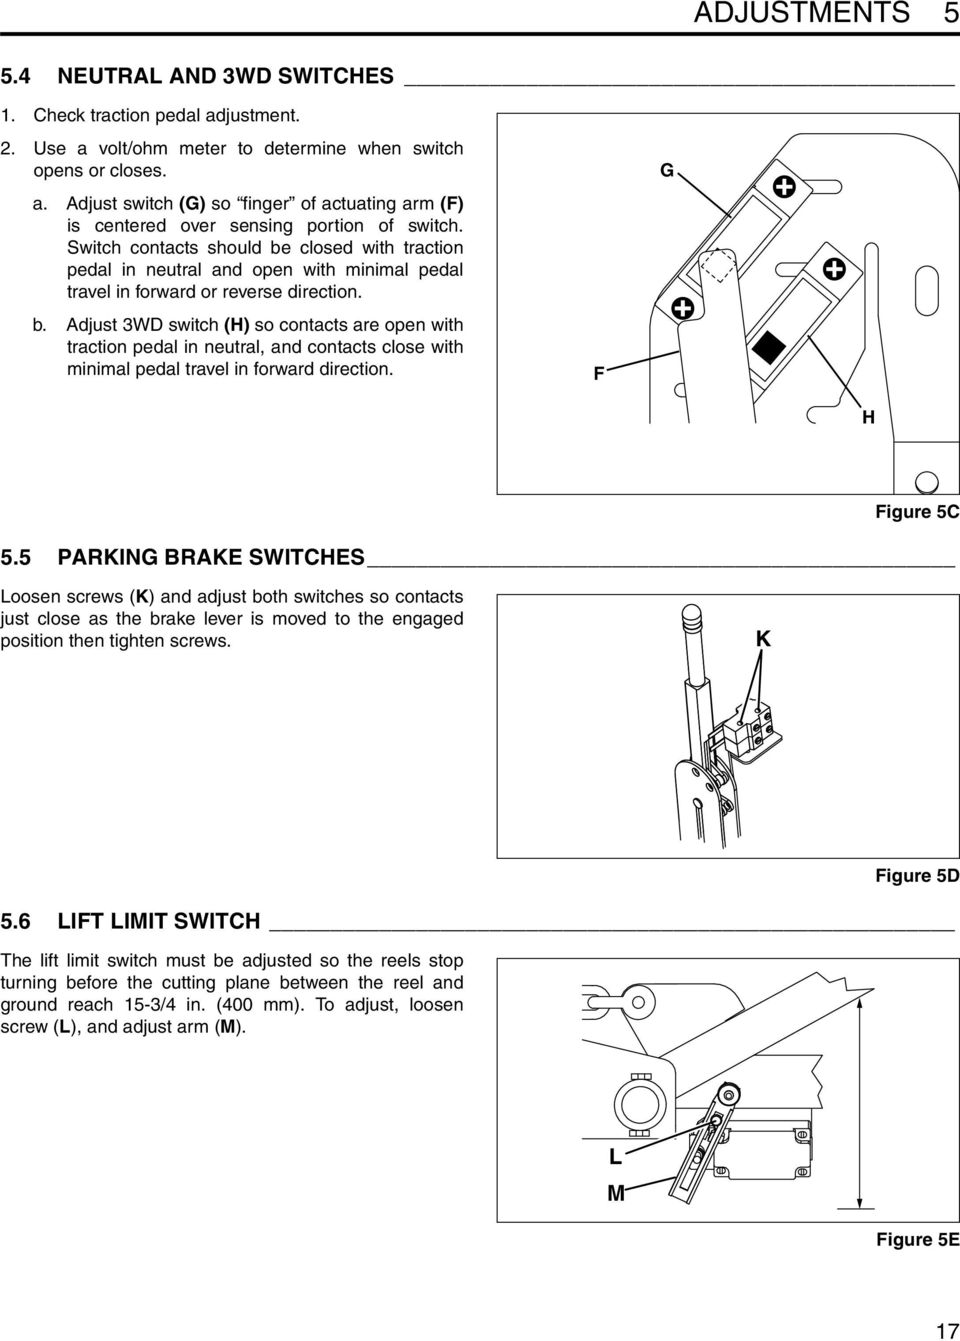 F G H Figure 5C 5.5 PARKING BRAKE SWITCHES Loosen screws (K) and adjust both switches so contacts just close as the brake lever is moved to the engaged position then tighten screws. K Figure 5D 5.